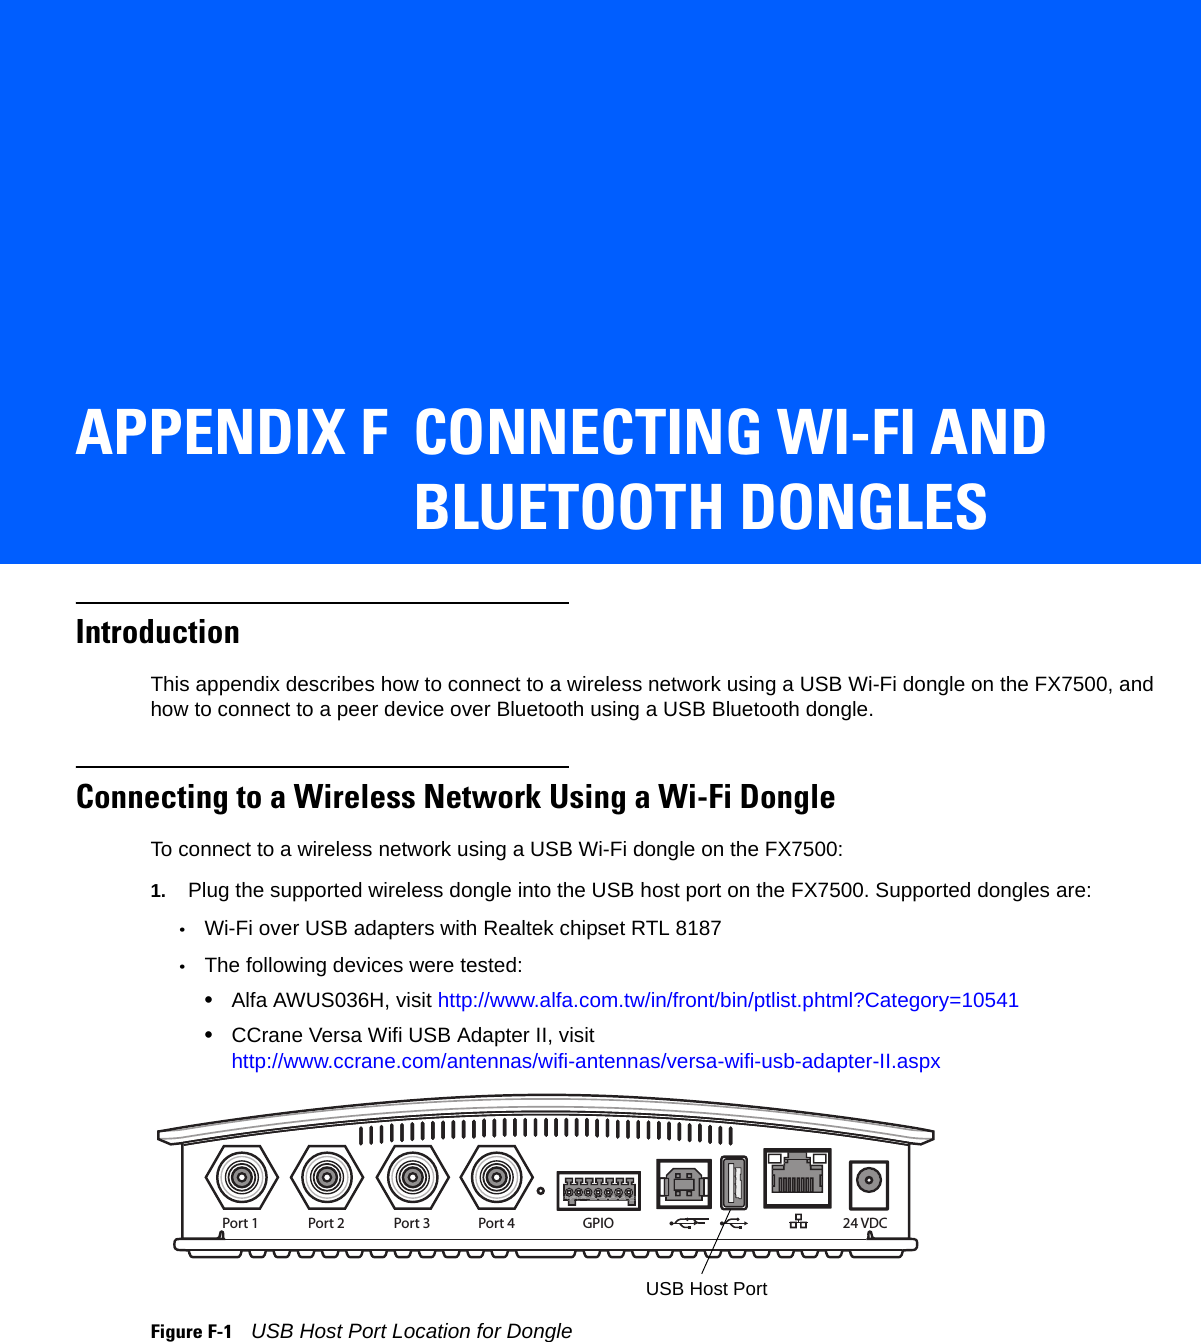 APPENDIX F CONNECTING WI-FI AND BLUETOOTH DONGLESIntroductionThis appendix describes how to connect to a wireless network using a USB Wi-Fi dongle on the FX7500, and how to connect to a peer device over Bluetooth using a USB Bluetooth dongle.Connecting to a Wireless Network Using a Wi-Fi DongleTo connect to a wireless network using a USB Wi-Fi dongle on the FX7500:1. Plug the supported wireless dongle into the USB host port on the FX7500. Supported dongles are:•Wi-Fi over USB adapters with Realtek chipset RTL 8187•The following devices were tested:•Alfa AWUS036H, visit http://www.alfa.com.tw/in/front/bin/ptlist.phtml?Category=10541•CCrane Versa Wifi USB Adapter II, visit http://www.ccrane.com/antennas/wifi-antennas/versa-wifi-usb-adapter-II.aspxFigure F-1    USB Host Port Location for DonglePort 1 Port 2 Port 3 Port 4 GPIO 24 VDCUSB Host Port